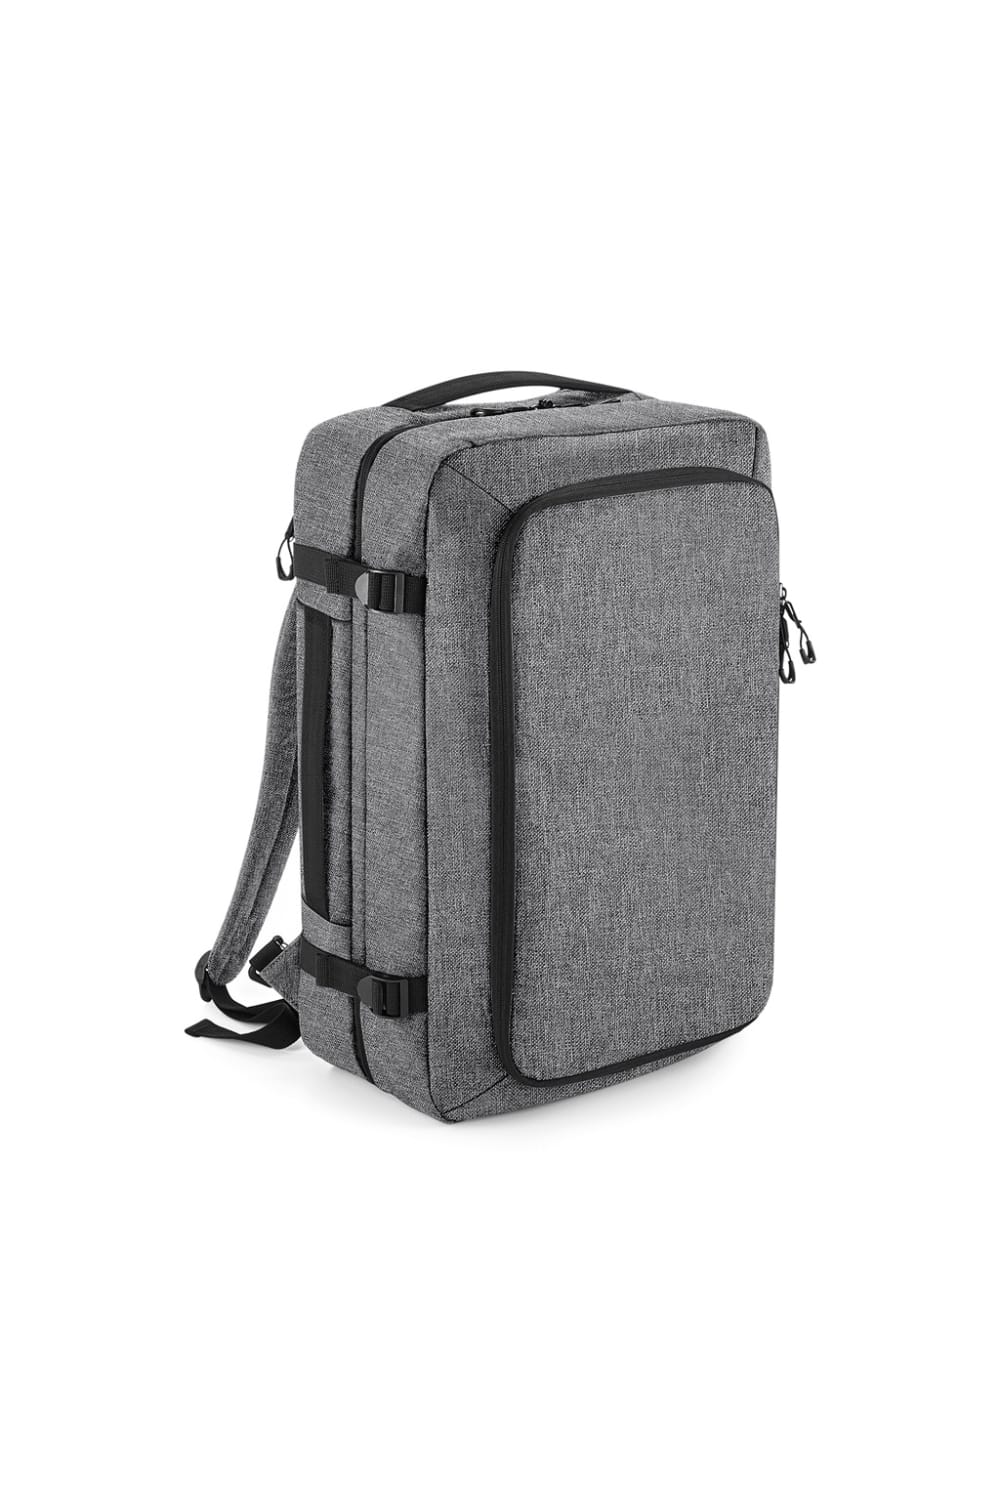 Escape Carry-On Backpack (Gray Marl)